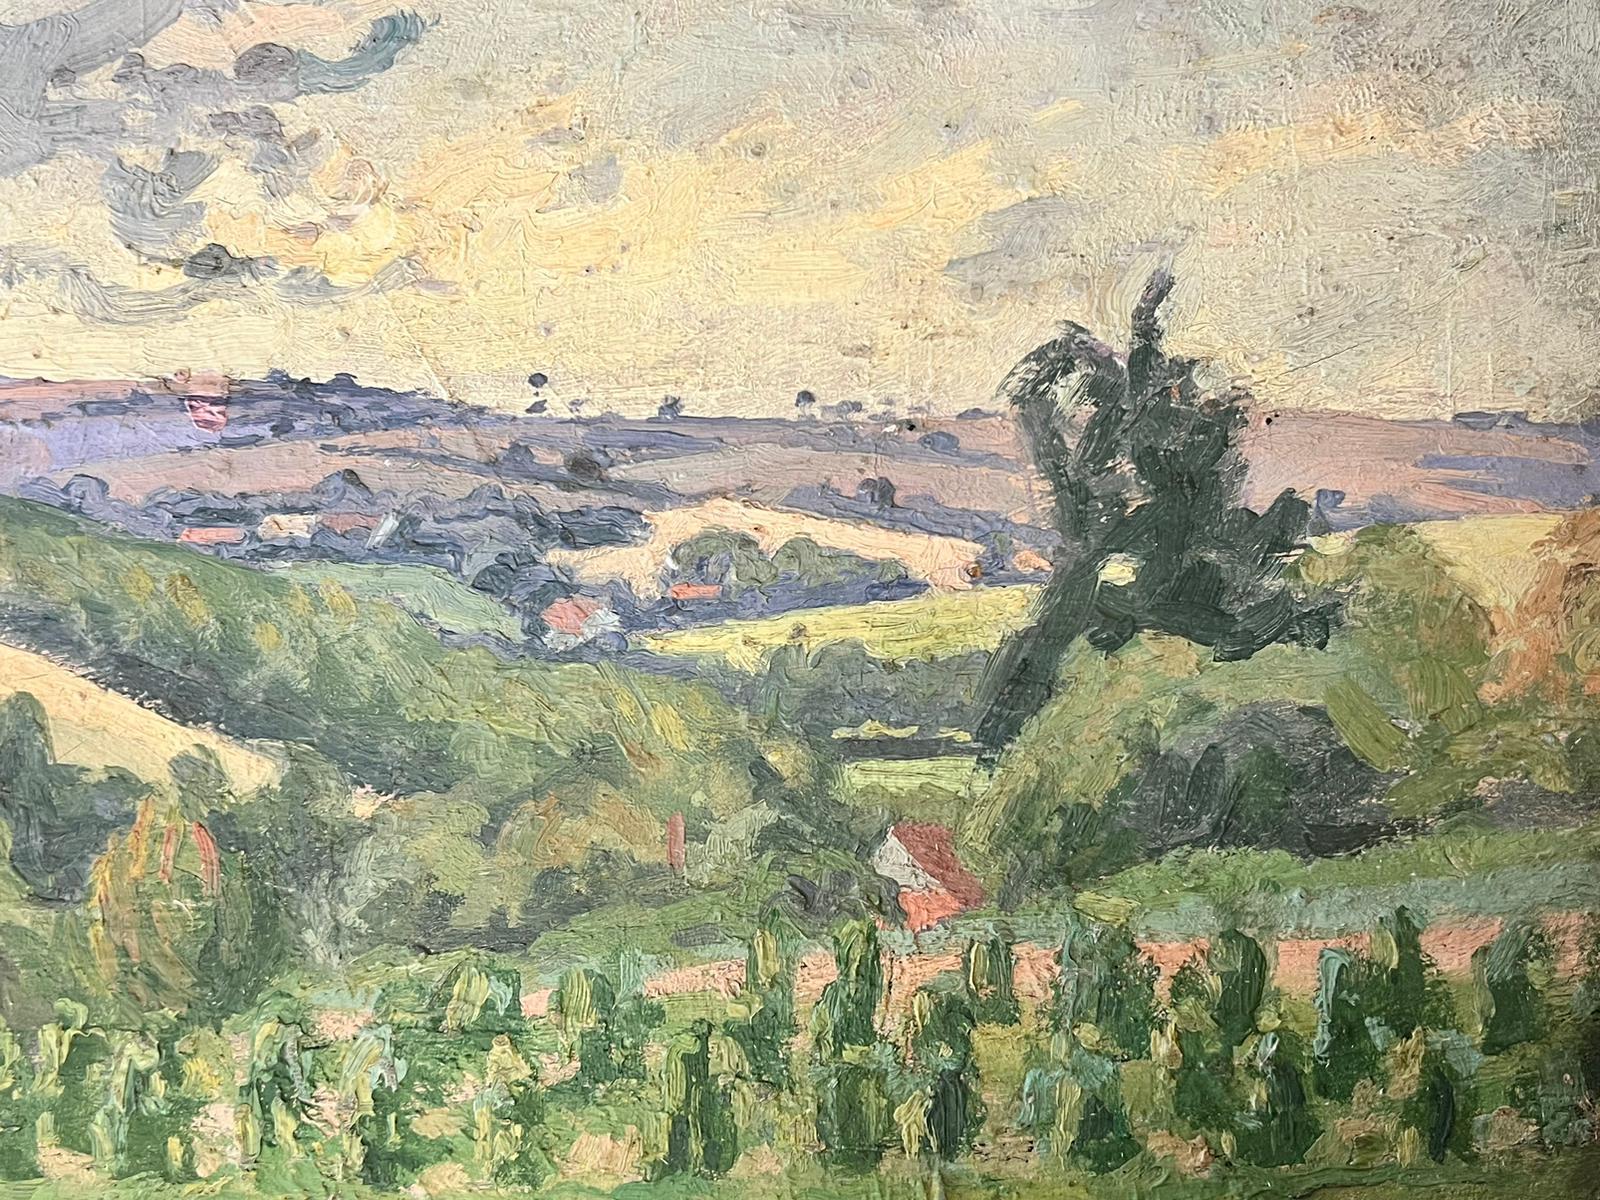 Artist/ School: Suzanne Crochet (French c. 1930), female French Impressionist artist

Title: The Farm Landscape

Medium: oil on board, unframed

Size:

board: 9.5 x 13 inches

Provenance: private collection, France

Condition: The painting is in